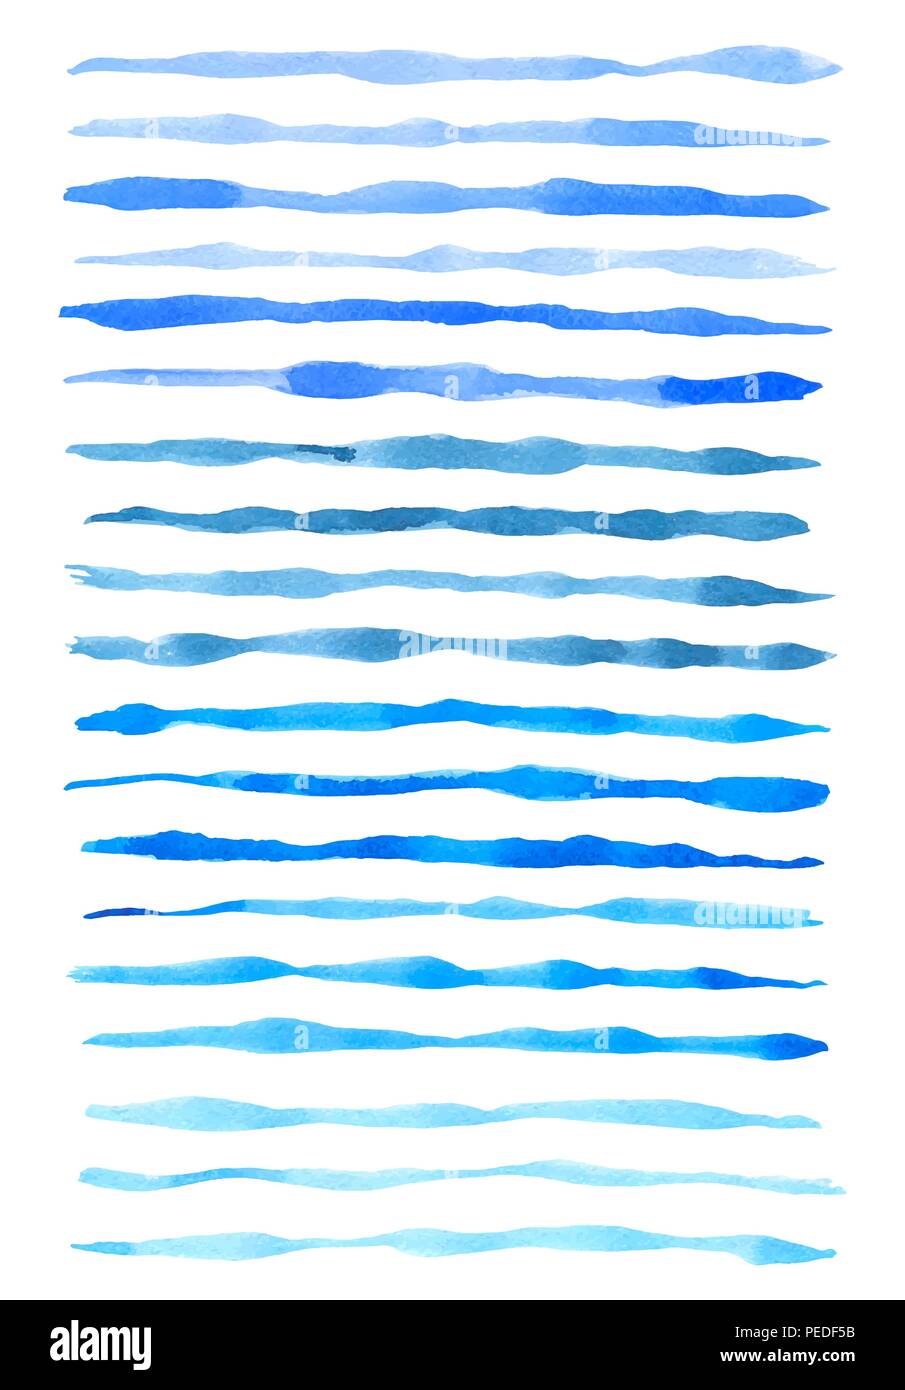 Set of vector blue watercolor lines isolated on a white background. Stock Vector